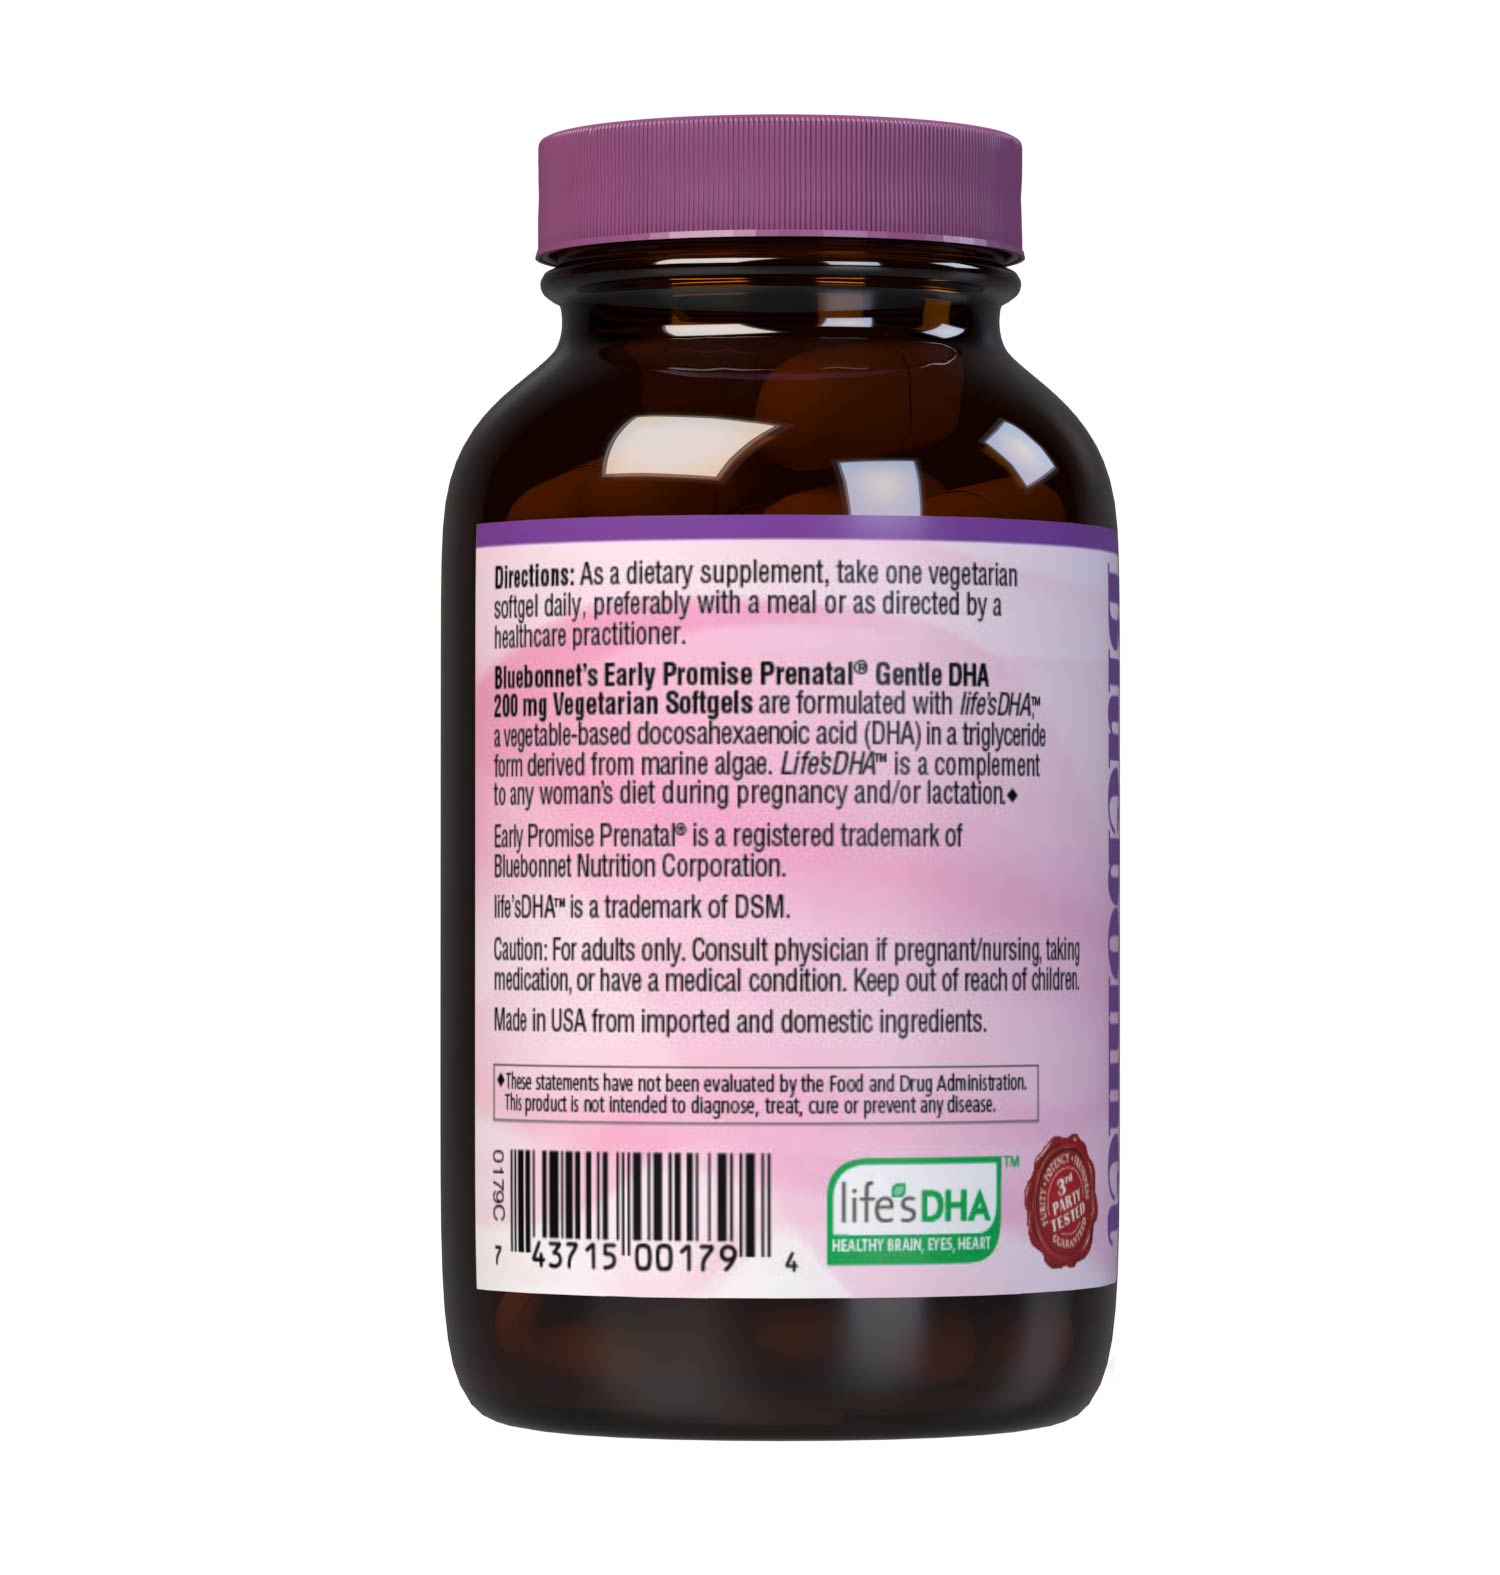 Early Promise Prenatal Gentle DHA 200 mg 60 Vegetarian Softgels are formulated with life'sDHA, a vegetable-based docosahexaenoic acid (DHA) in a triglyceride form derived from marine algae. Life'sDHA™ is the perfect complement to any woman's diet during pregnancy and/or lactation. Description panel. #size_60 count